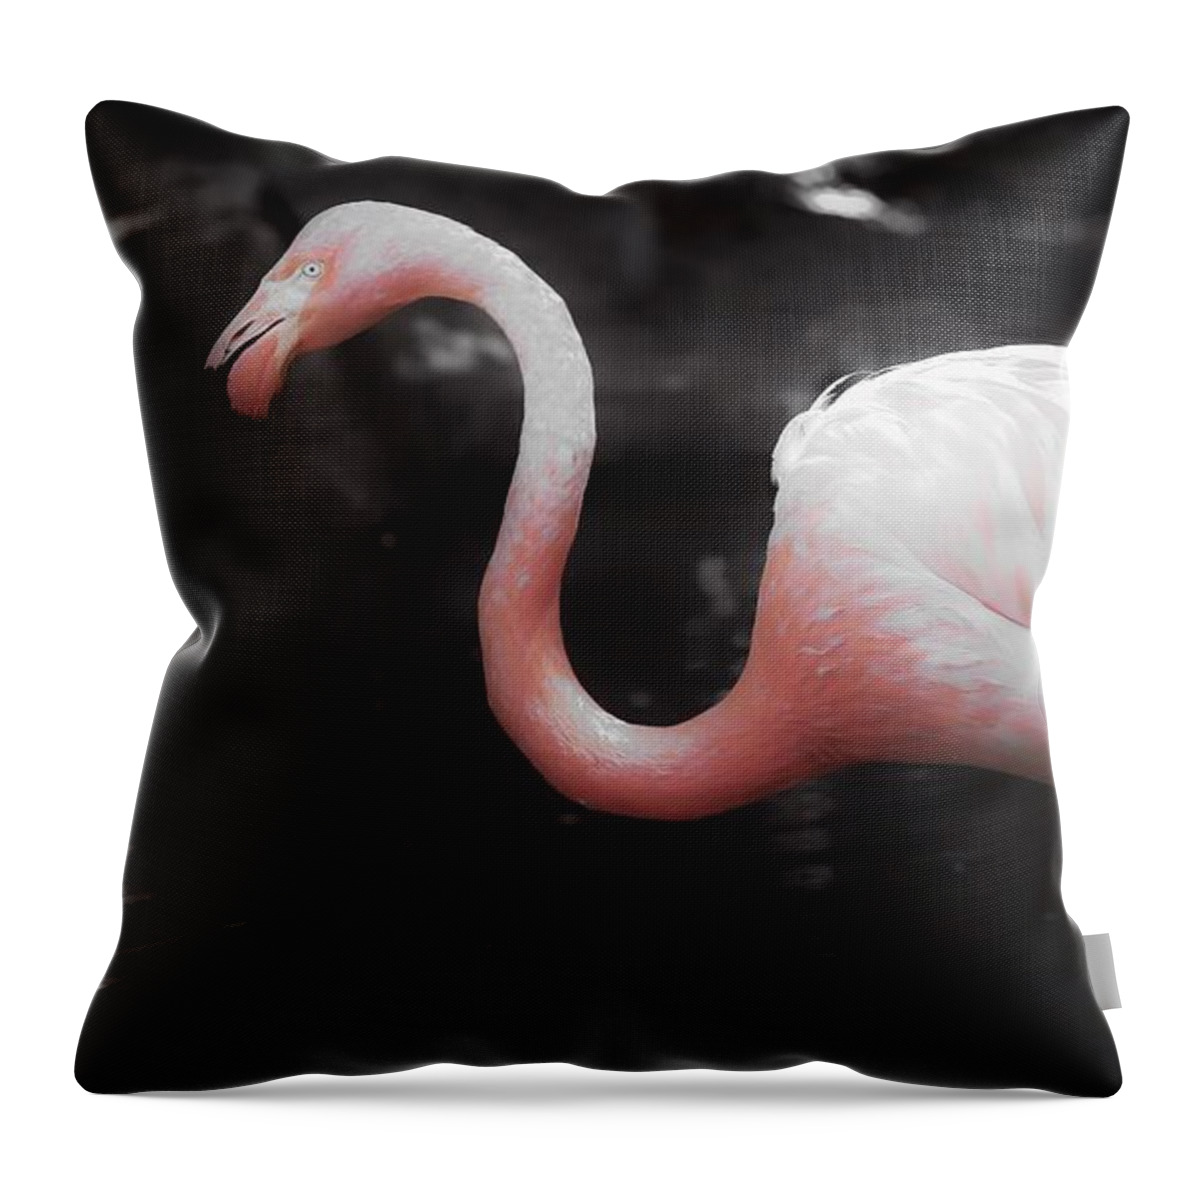 Flamingo Throw Pillow featuring the photograph Feathers by Veronica Batterson